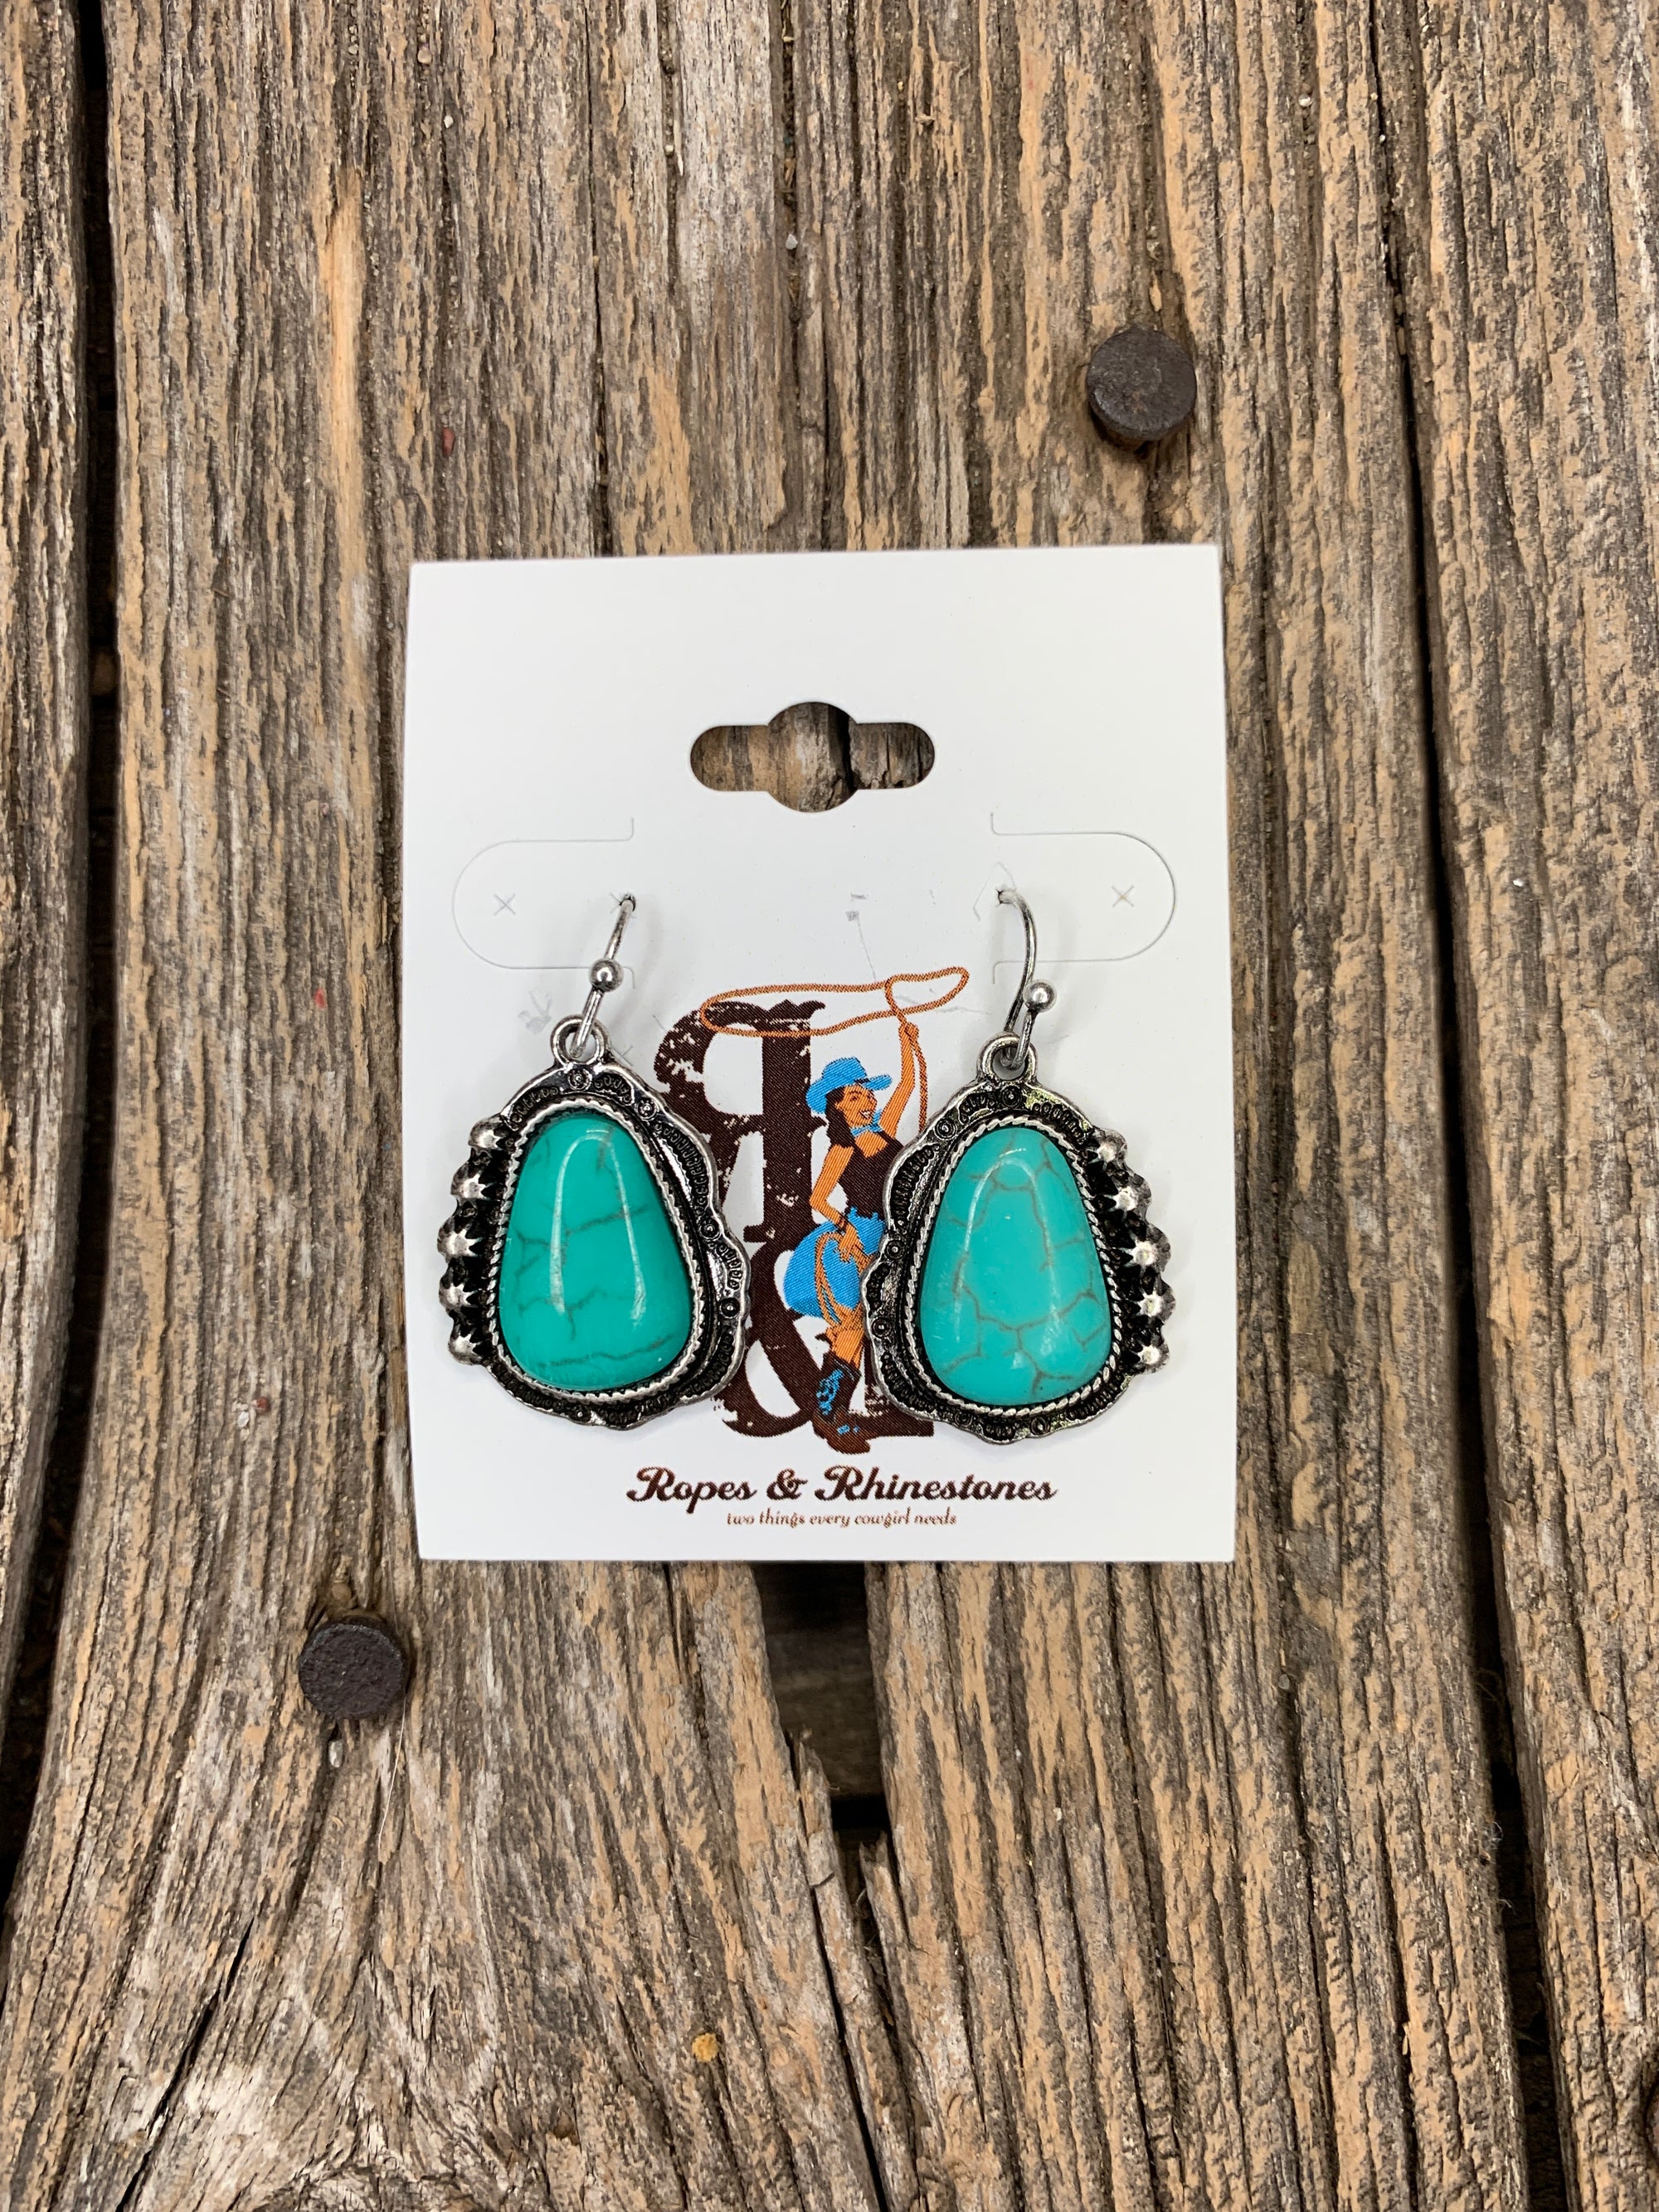 Cinco Spot Turquoise Earrings - Ropes and Rhinestones